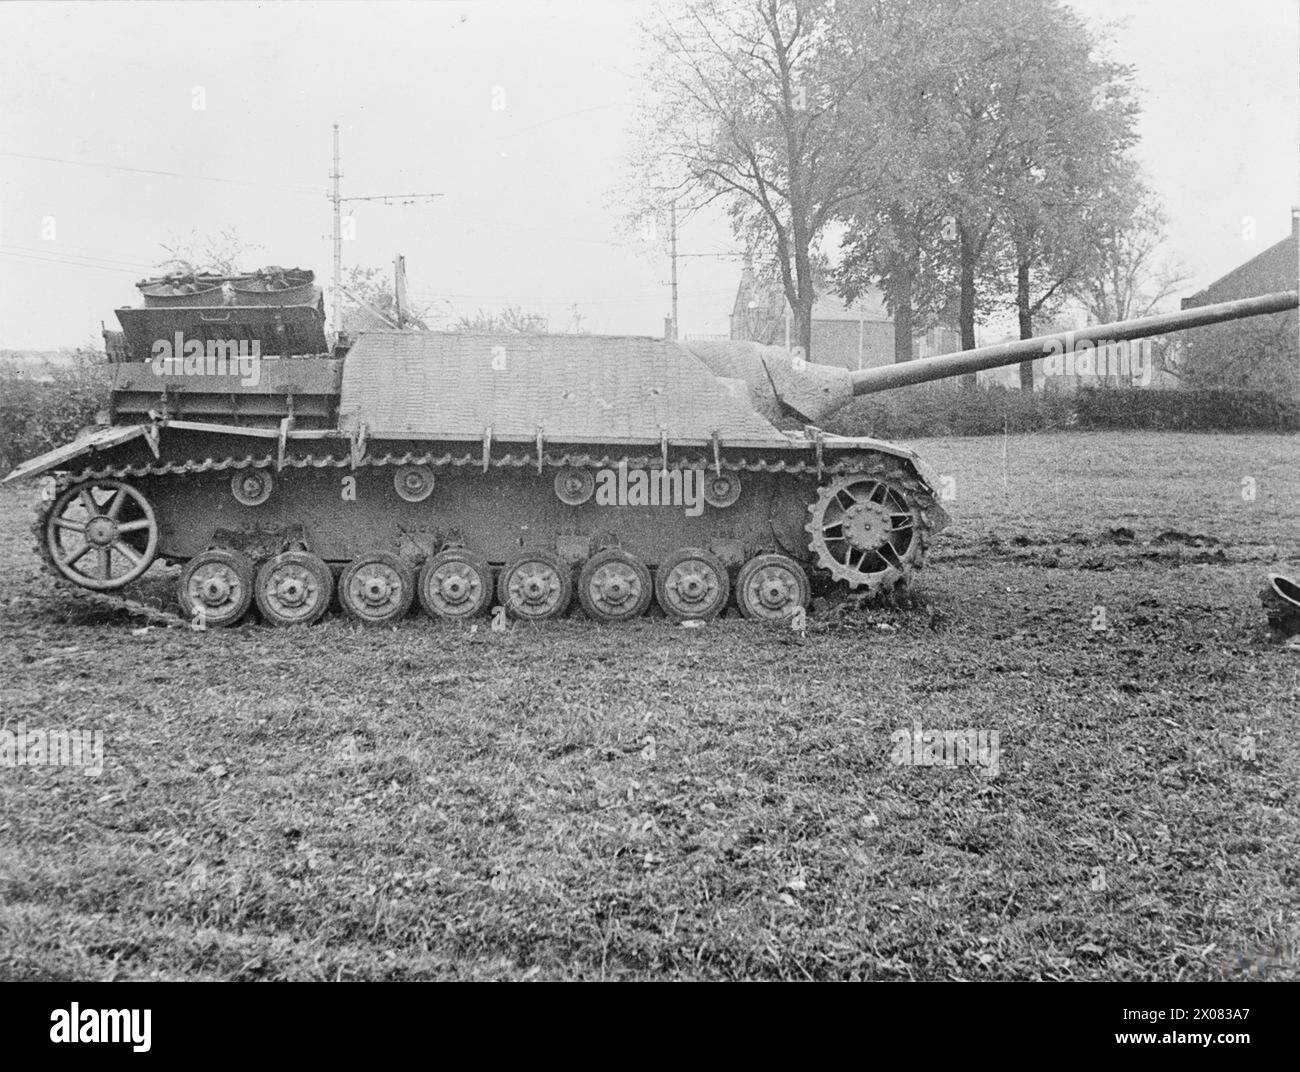 GERMAN TANKS AND MILITARY VEHICLES OF THE SECOND WORLD WAR - Knocked-out Panzer IV/70 (V) - Jagdpanzer IV , Stock Photo